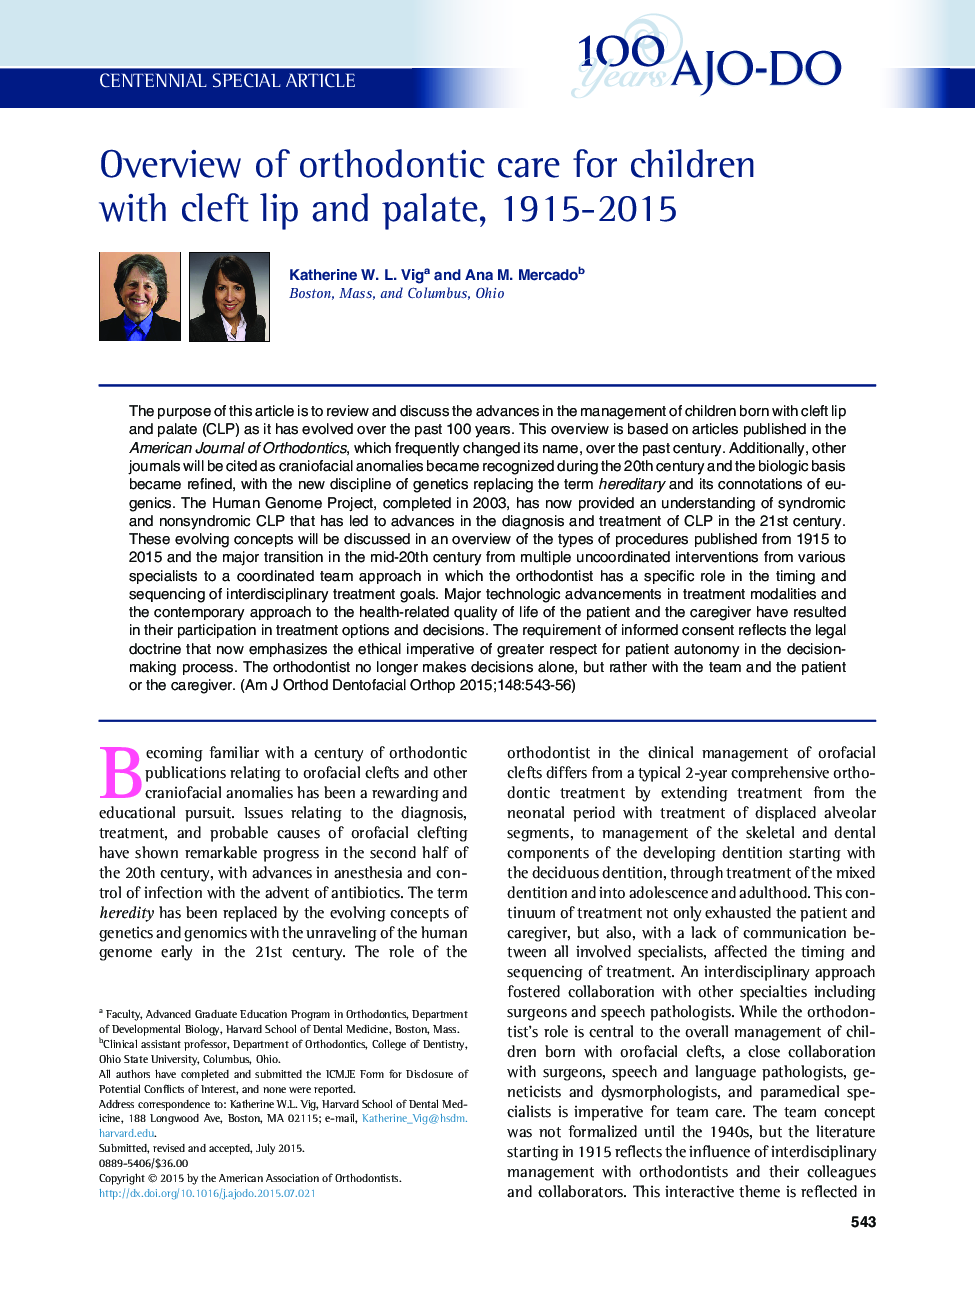 Overview of orthodontic care for children with cleft lip and palate, 1915-2015 